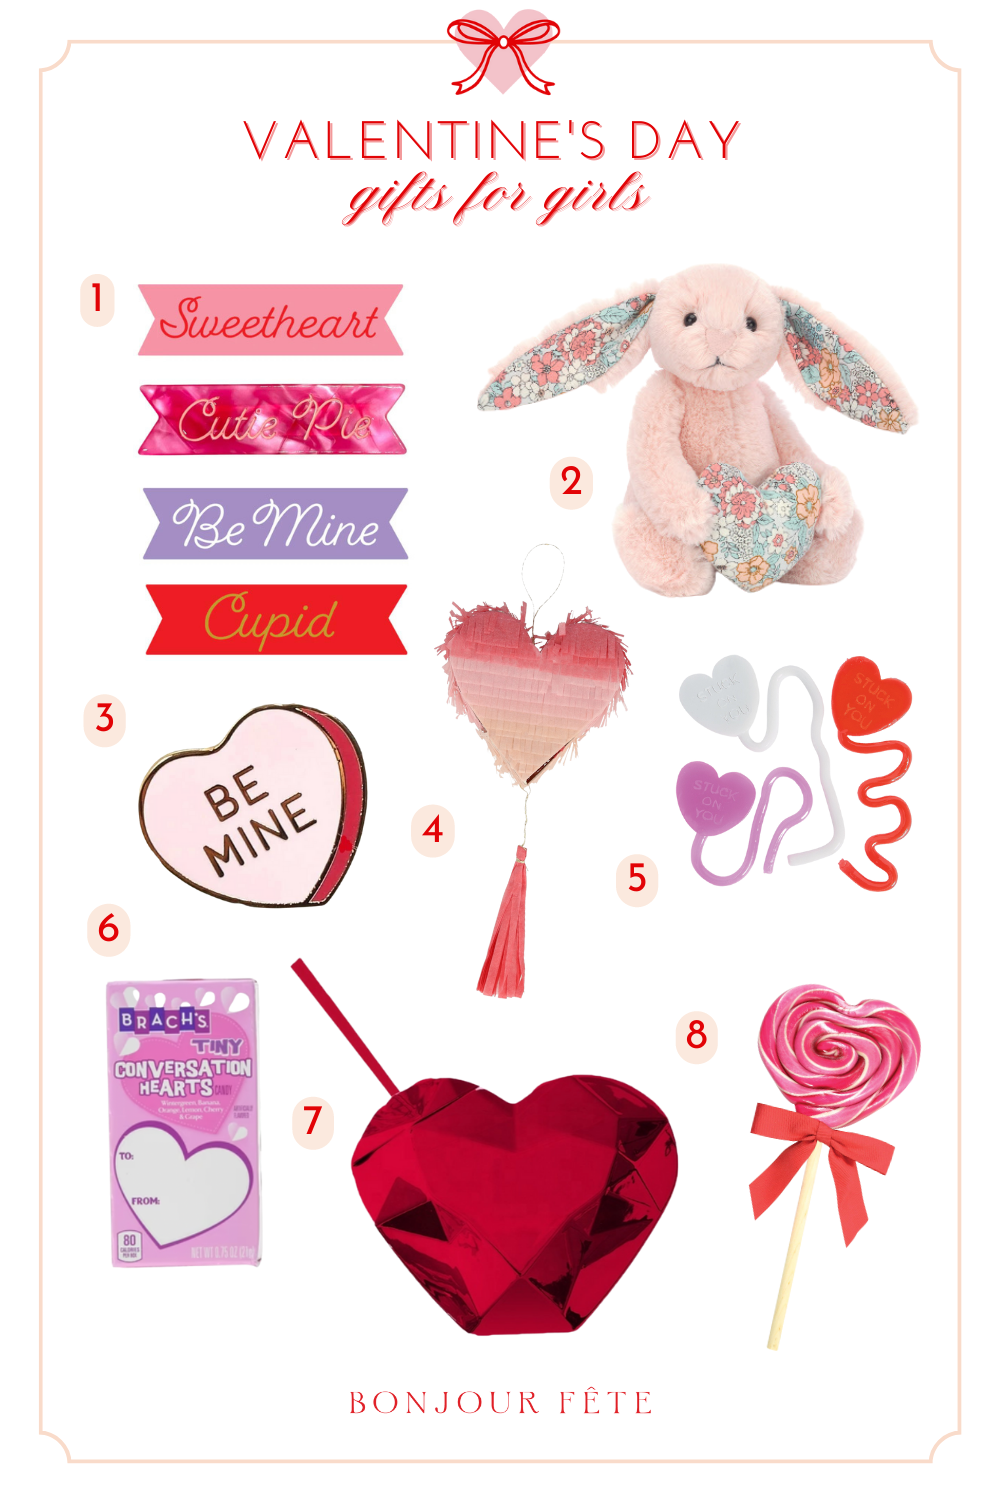 Valentine's Day gifts for girls.